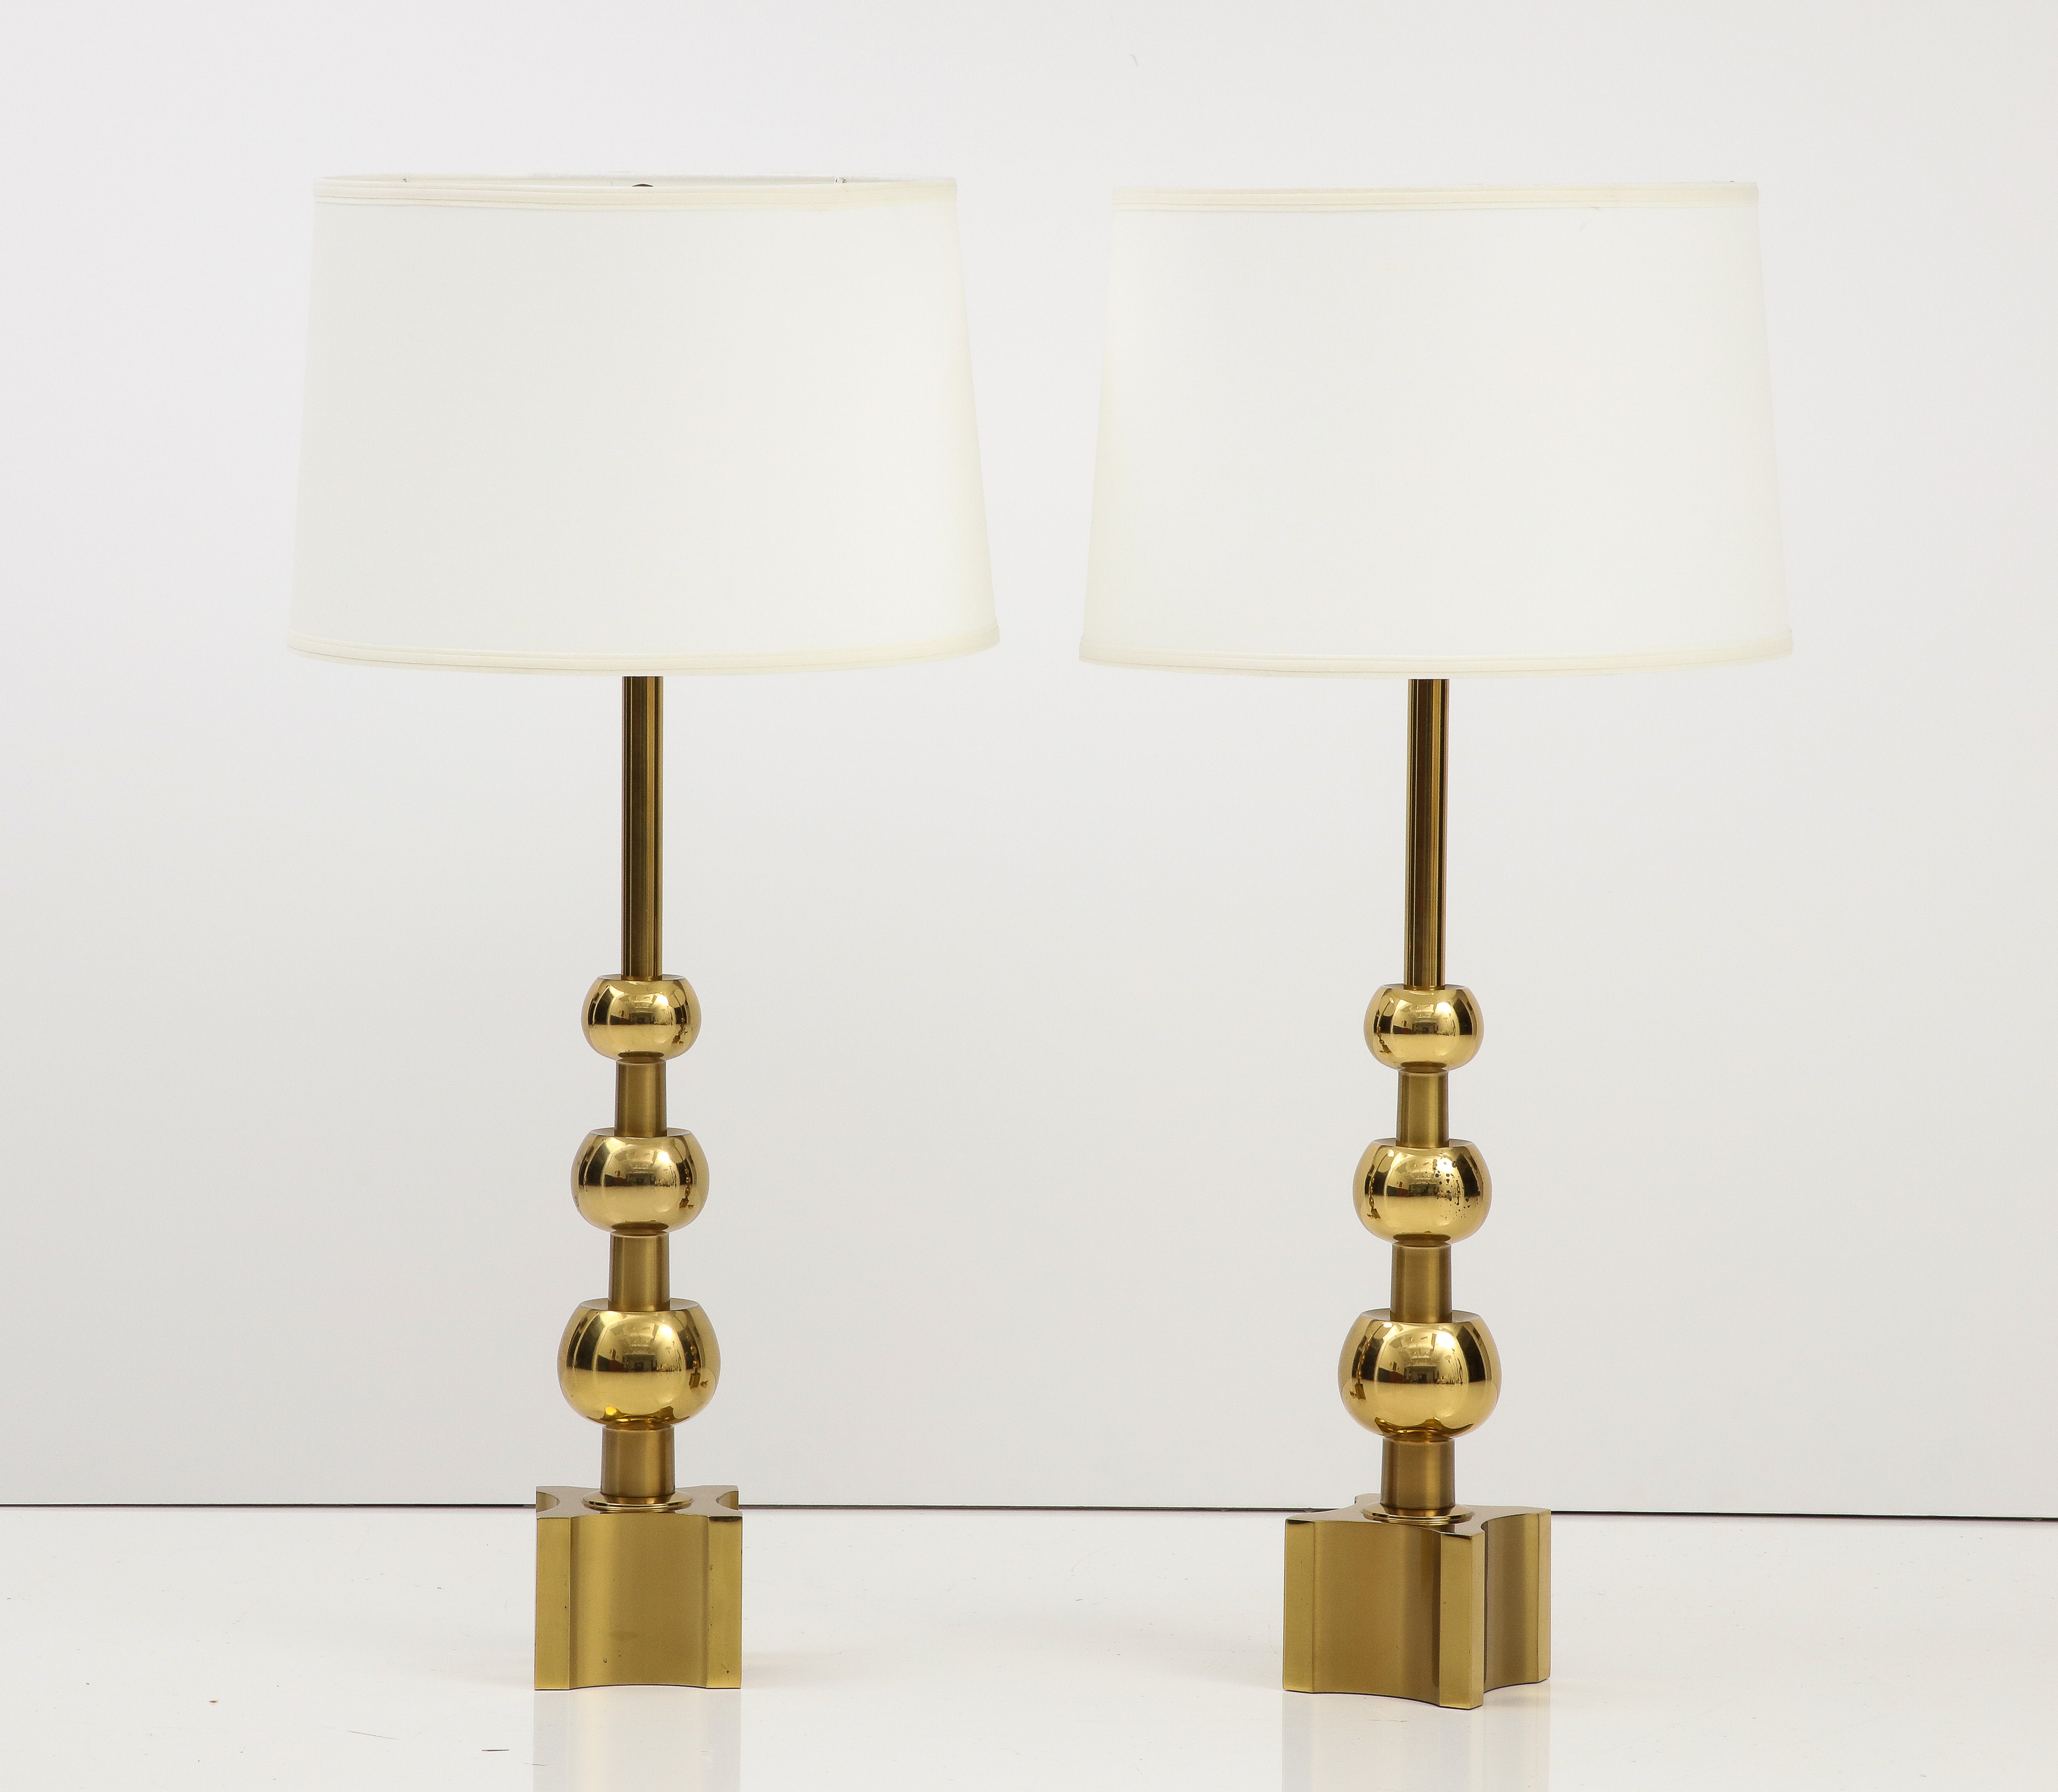 1960's Mid-Century Modern brass tale lamps designed by Tommi Parzinger for Stiffel, in vintage original condition with some wear and patina to the brass due to age and use. 

Measure: Height to light socket 33''.